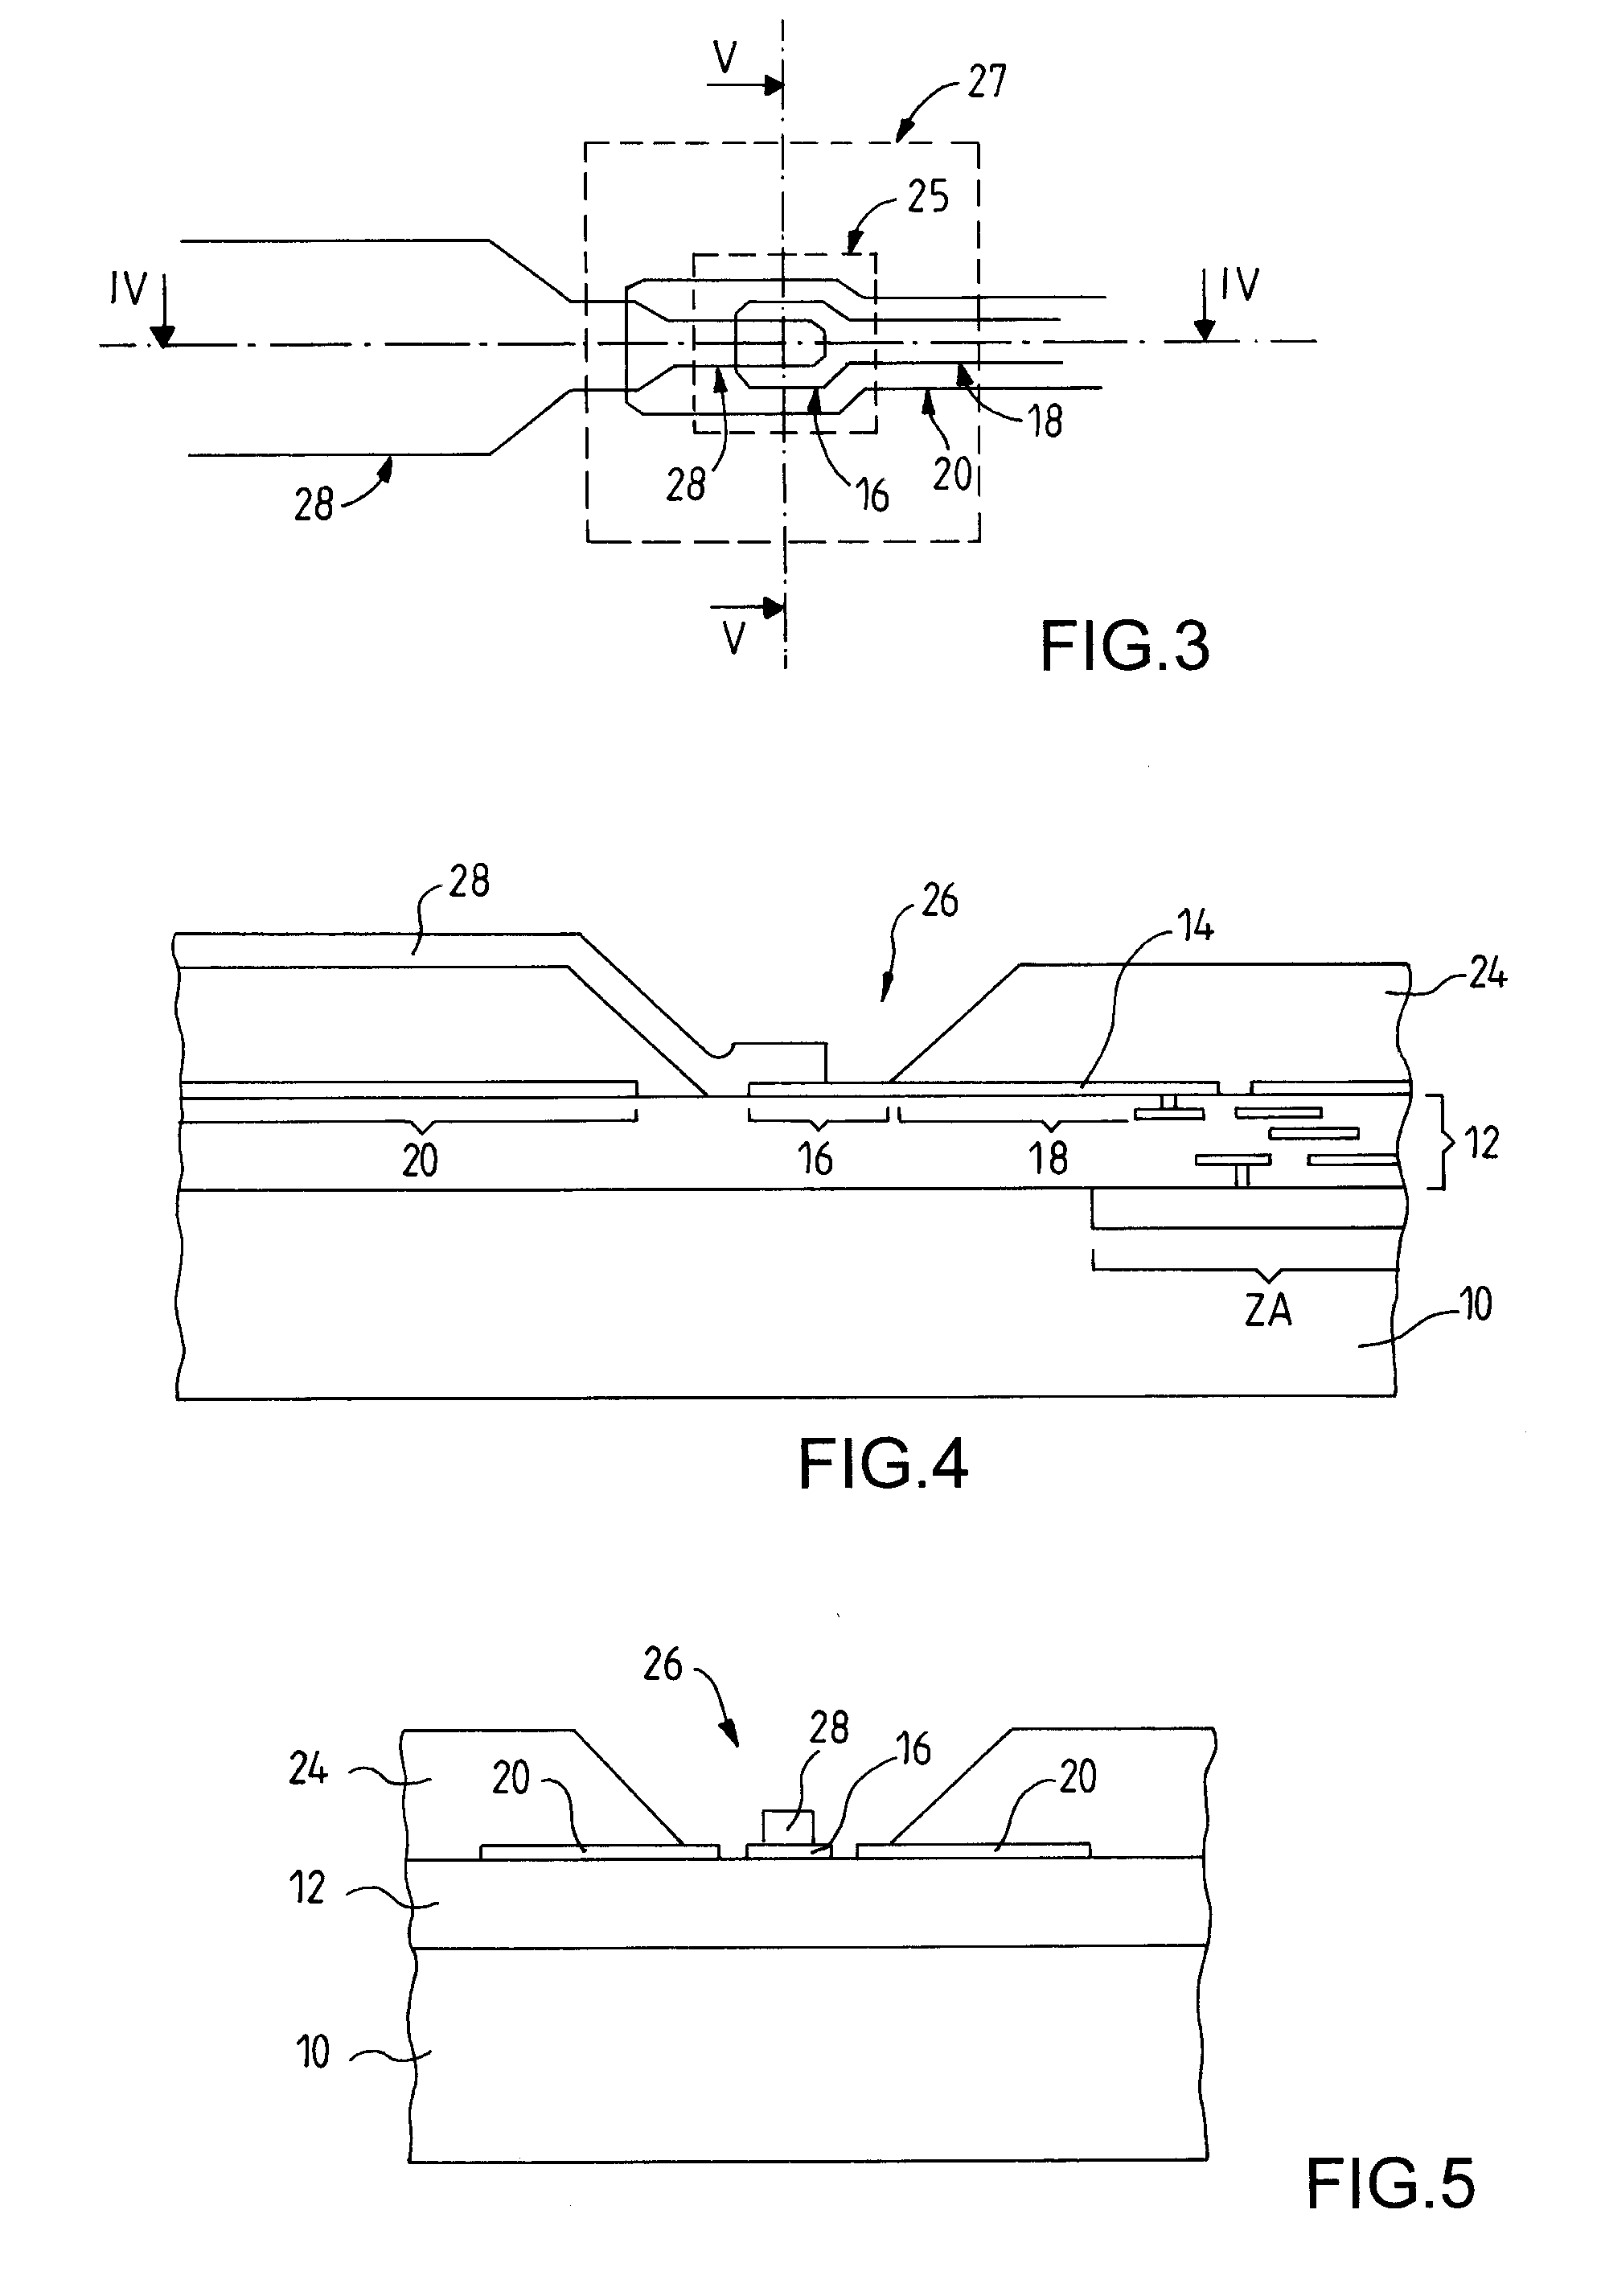 Silicon integrated circuit operating at microwave frequencies and fabrication process